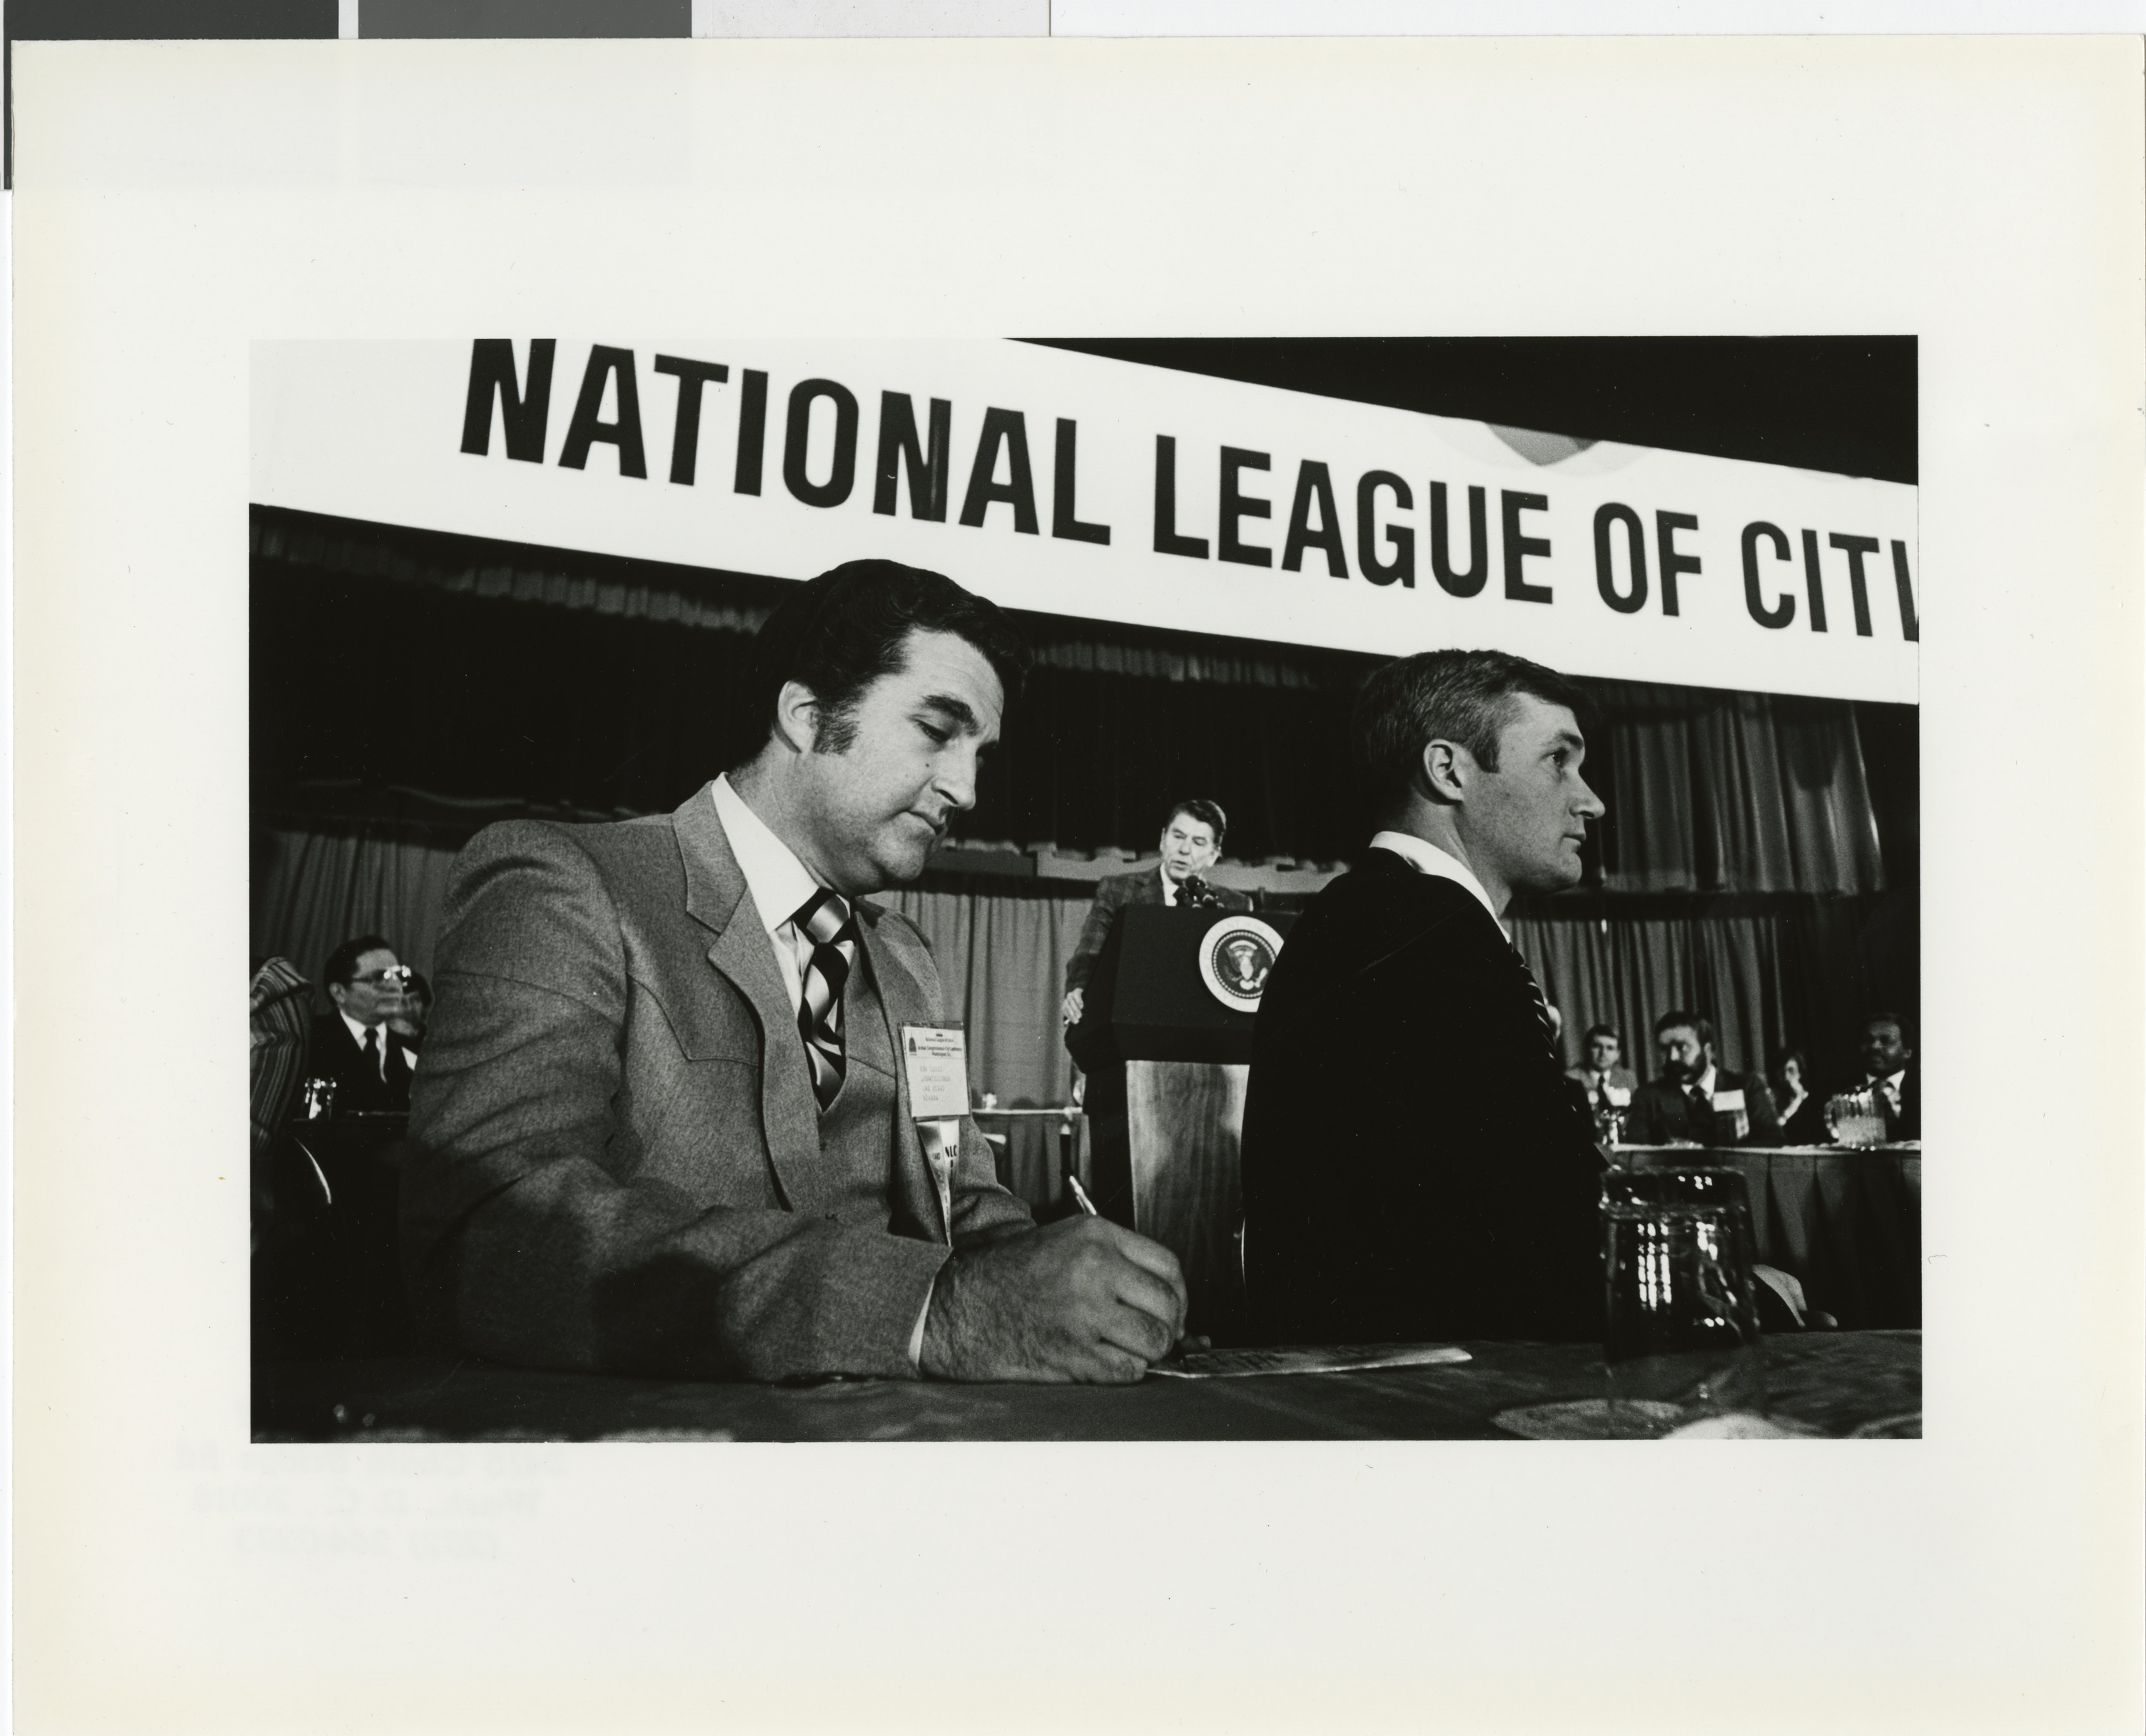 Photograph of Ron Lurie at a National League of Cities event with Ronald Reagan (at podium)